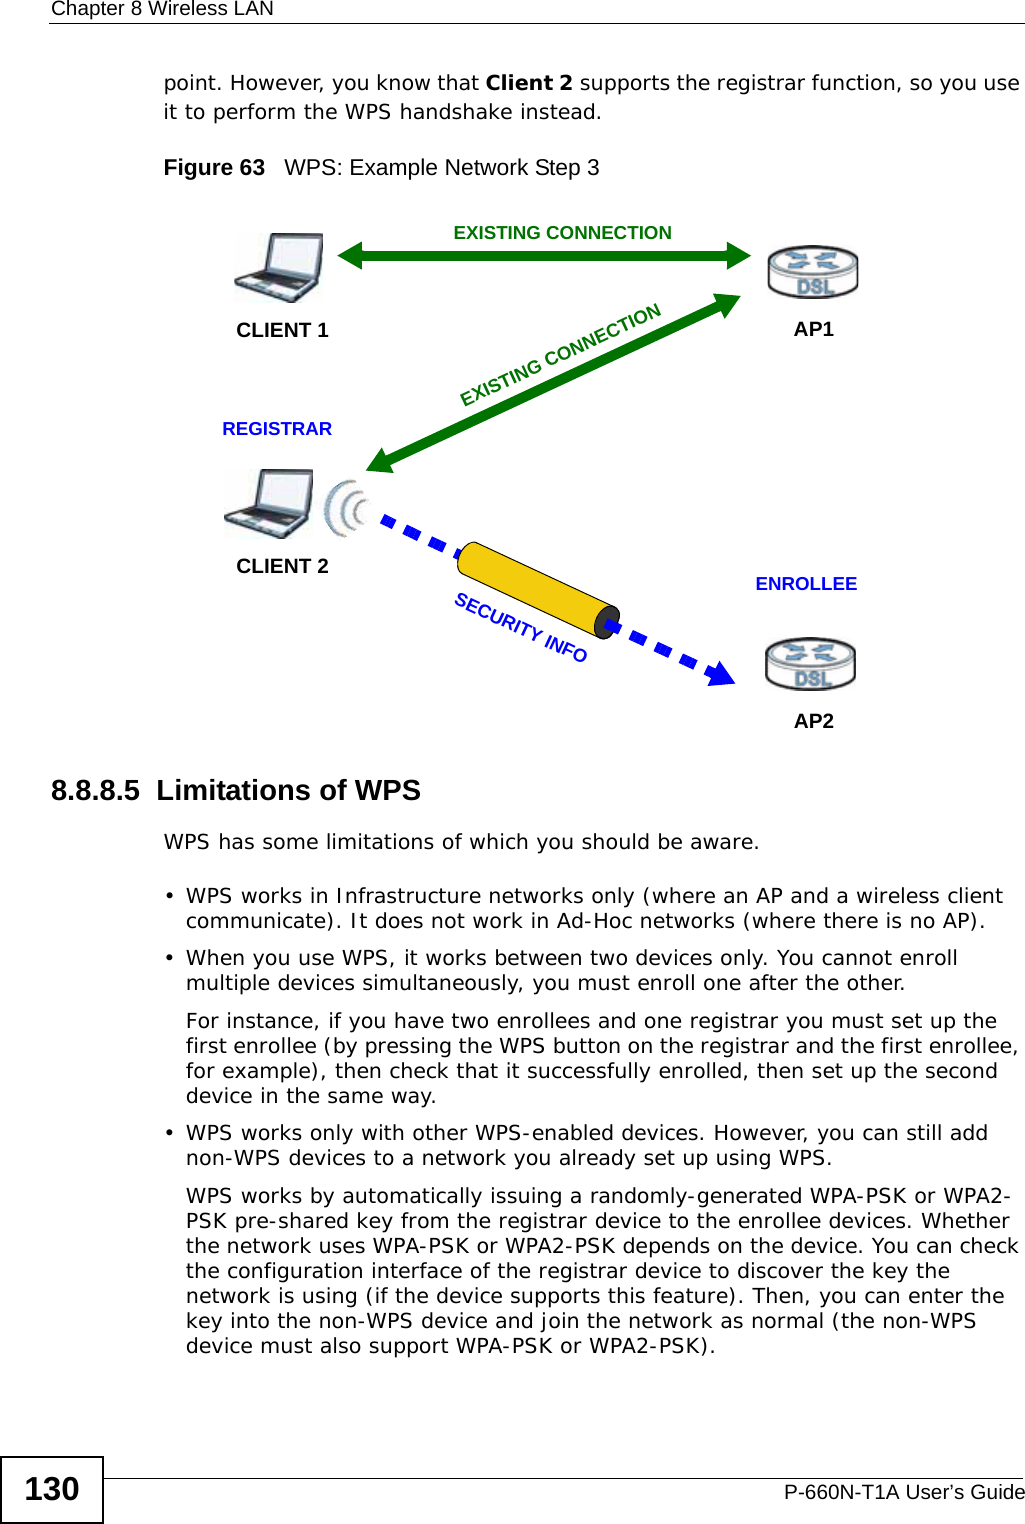 Chapter 8 Wireless LANP-660N-T1A User’s Guide130point. However, you know that Client 2 supports the registrar function, so you use it to perform the WPS handshake instead.Figure 63   WPS: Example Network Step 38.8.8.5  Limitations of WPSWPS has some limitations of which you should be aware. • WPS works in Infrastructure networks only (where an AP and a wireless client communicate). It does not work in Ad-Hoc networks (where there is no AP).• When you use WPS, it works between two devices only. You cannot enroll multiple devices simultaneously, you must enroll one after the other. For instance, if you have two enrollees and one registrar you must set up the first enrollee (by pressing the WPS button on the registrar and the first enrollee, for example), then check that it successfully enrolled, then set up the second device in the same way.• WPS works only with other WPS-enabled devices. However, you can still add non-WPS devices to a network you already set up using WPS. WPS works by automatically issuing a randomly-generated WPA-PSK or WPA2-PSK pre-shared key from the registrar device to the enrollee devices. Whether the network uses WPA-PSK or WPA2-PSK depends on the device. You can check the configuration interface of the registrar device to discover the key the network is using (if the device supports this feature). Then, you can enter the key into the non-WPS device and join the network as normal (the non-WPS device must also support WPA-PSK or WPA2-PSK).CLIENT 1 AP1REGISTRARCLIENT 2EXISTING CONNECTIONSECURITY INFOENROLLEEAP2EXISTING CONNECTION